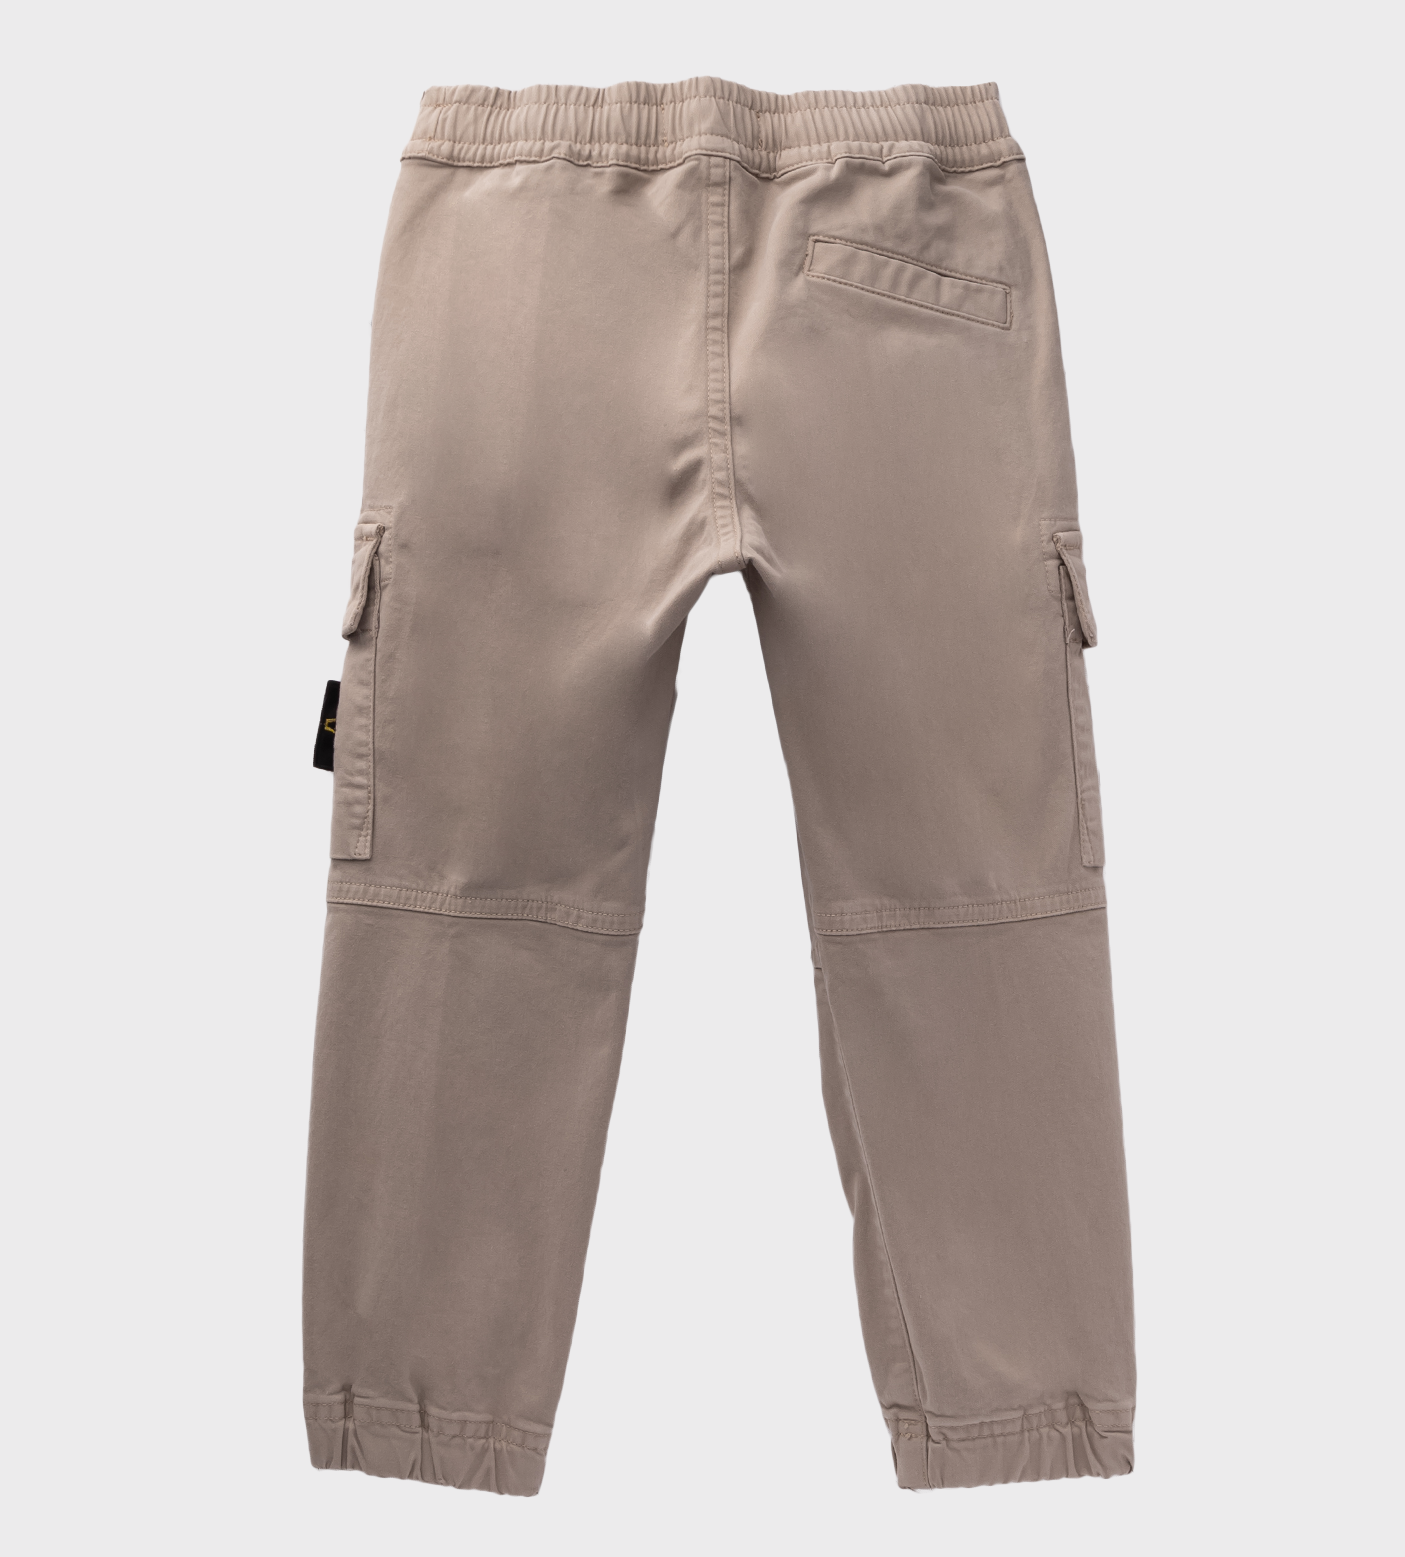 Compass-Motif Elasticated Trousers Beige